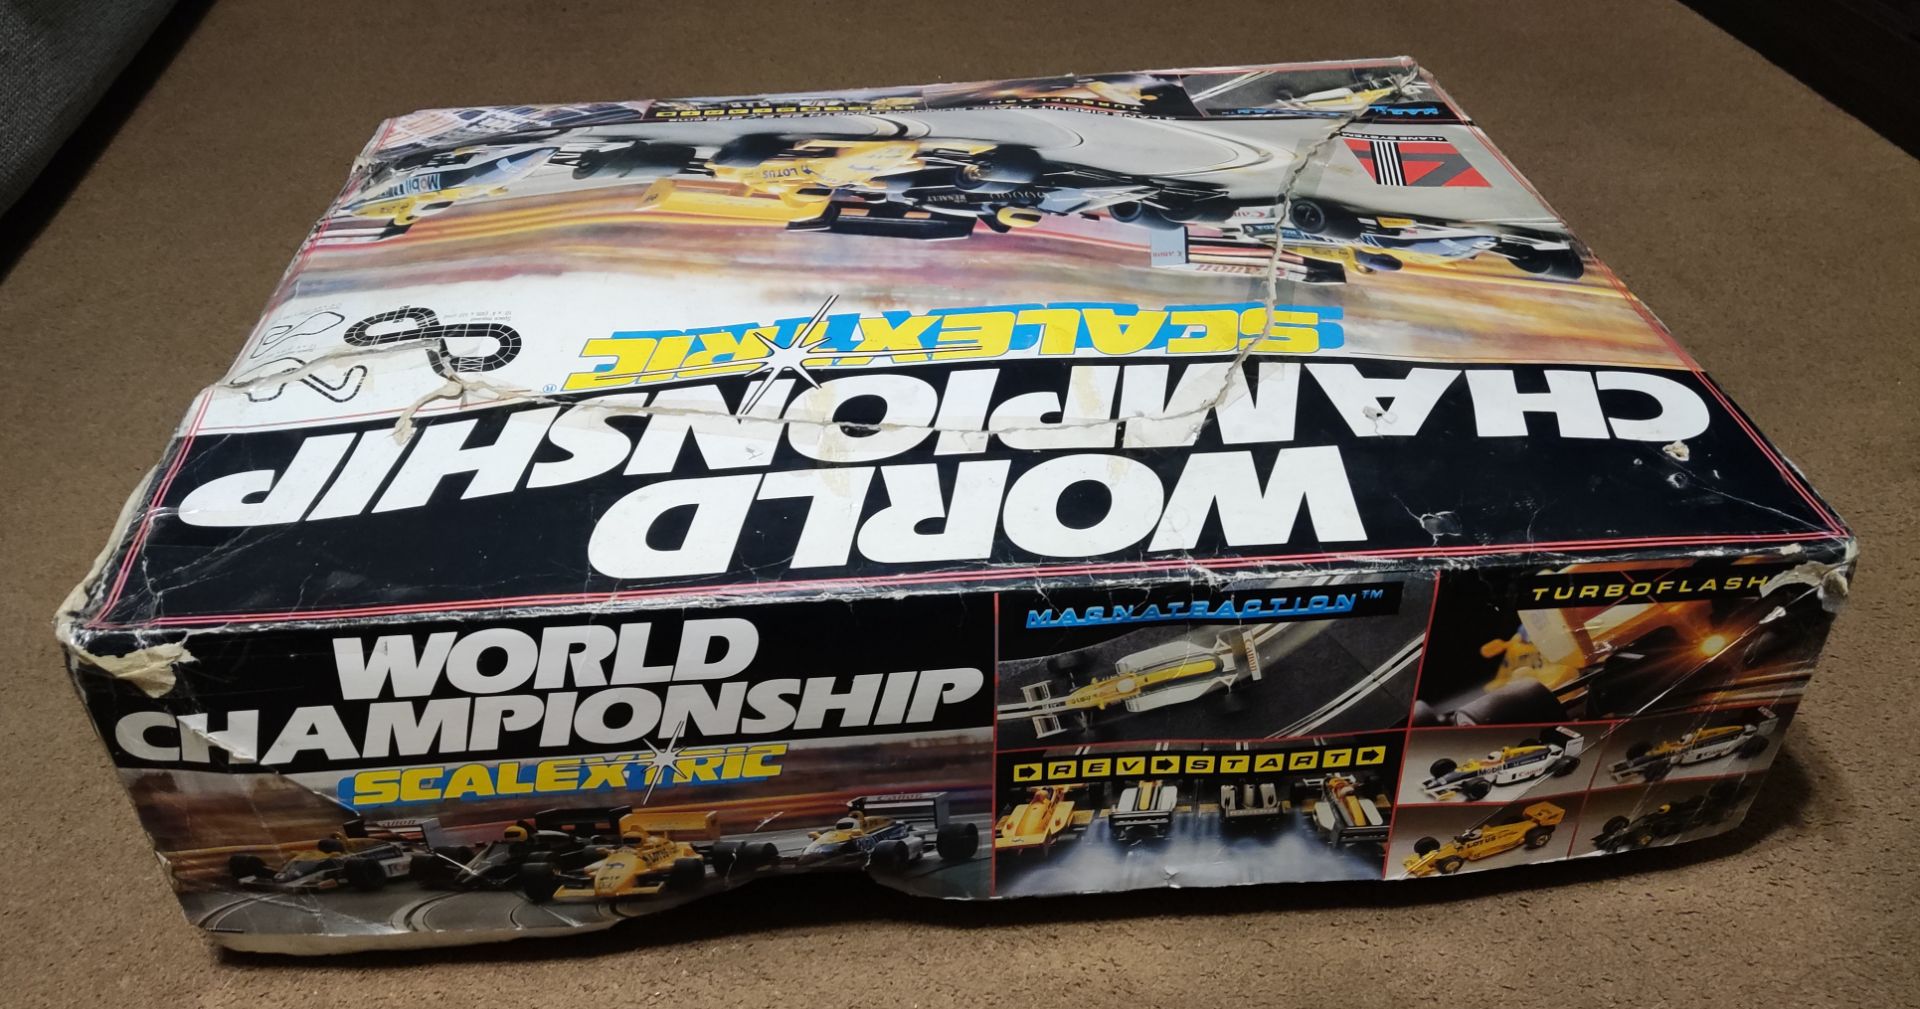 1 x Scalextric 4-Lane World Championship Set With 4 x F1 Cars - Huge Vintage Set - Used - CL444 - NO - Image 13 of 26